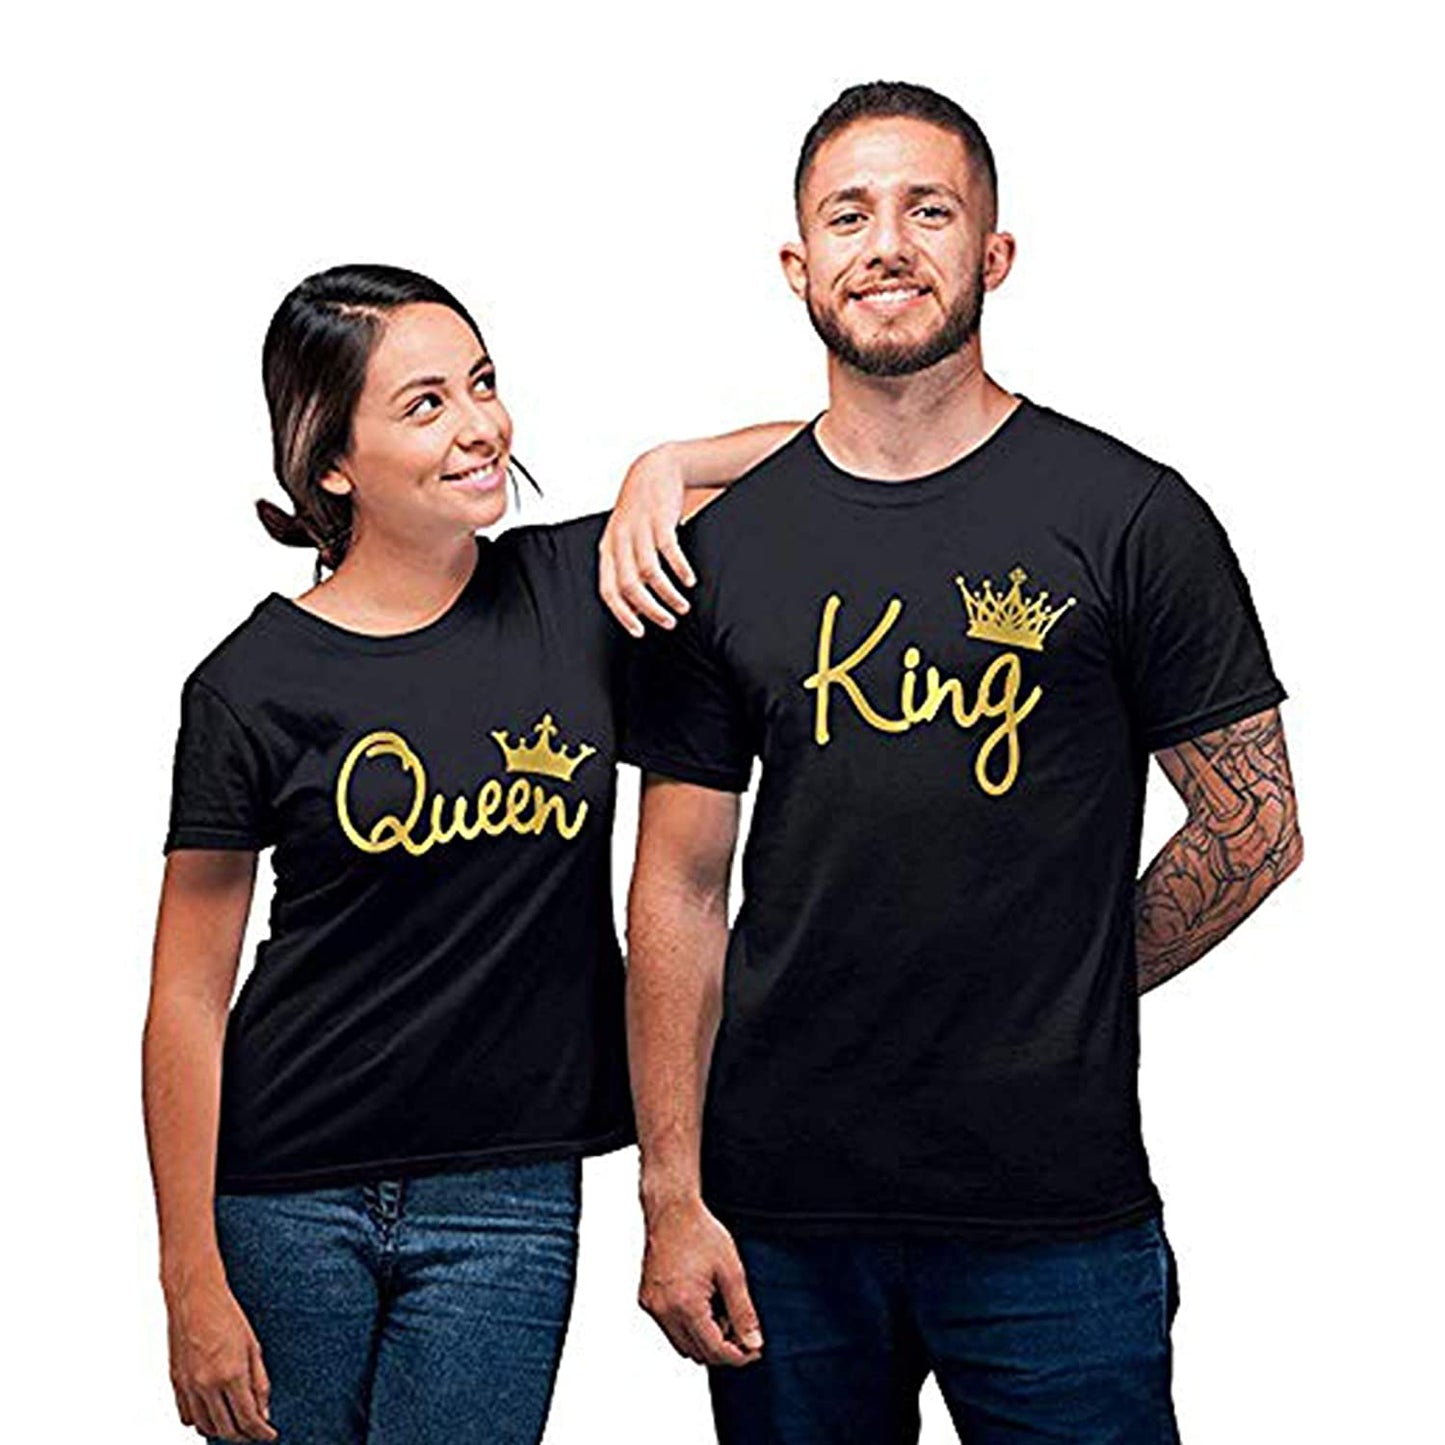 King Queen 2 matching Couple T shirts- Black